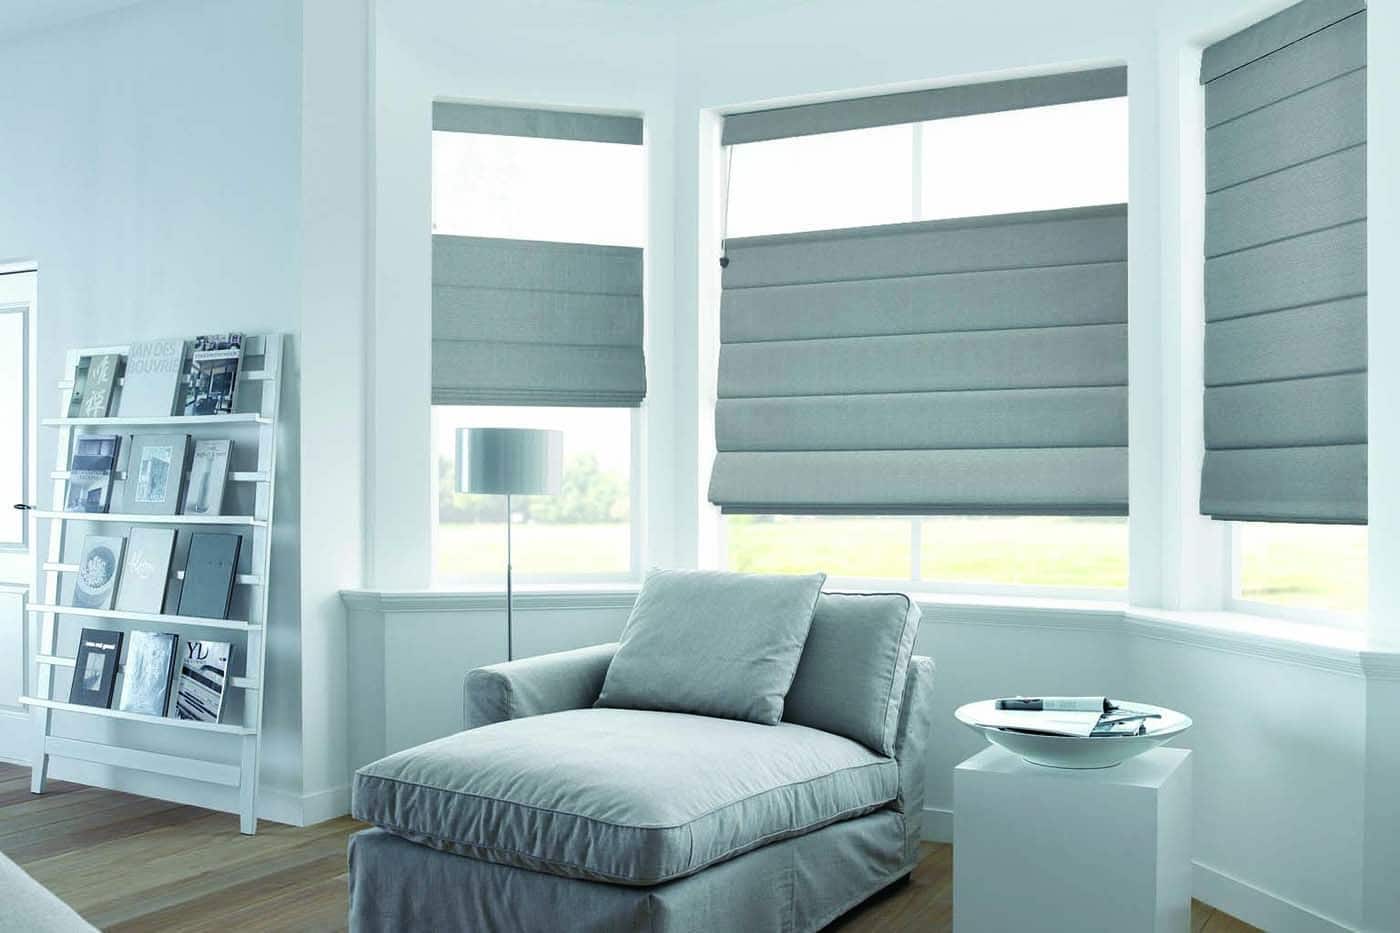 Elegant contemporary white-themed house space with windows covered by Luxaflex top-down Roman Blinds. Available in various fabrics, sizes, and opacity. For sale in Complete Blinds showroom.